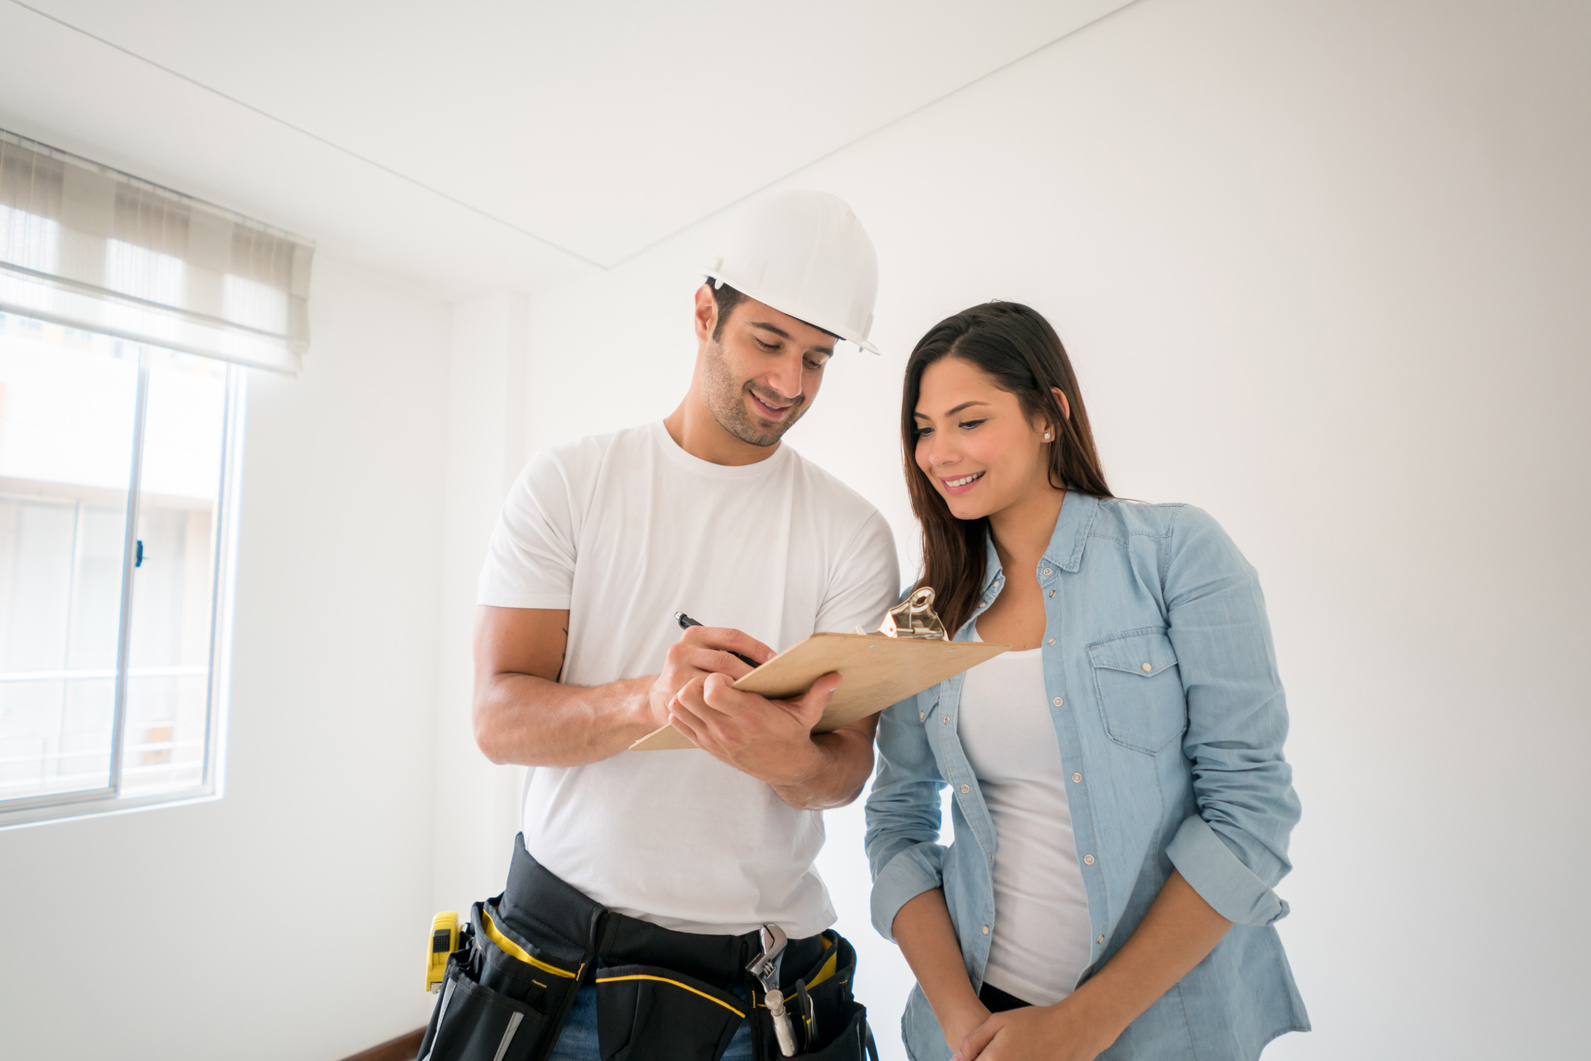 Contractor talking to a woman at home